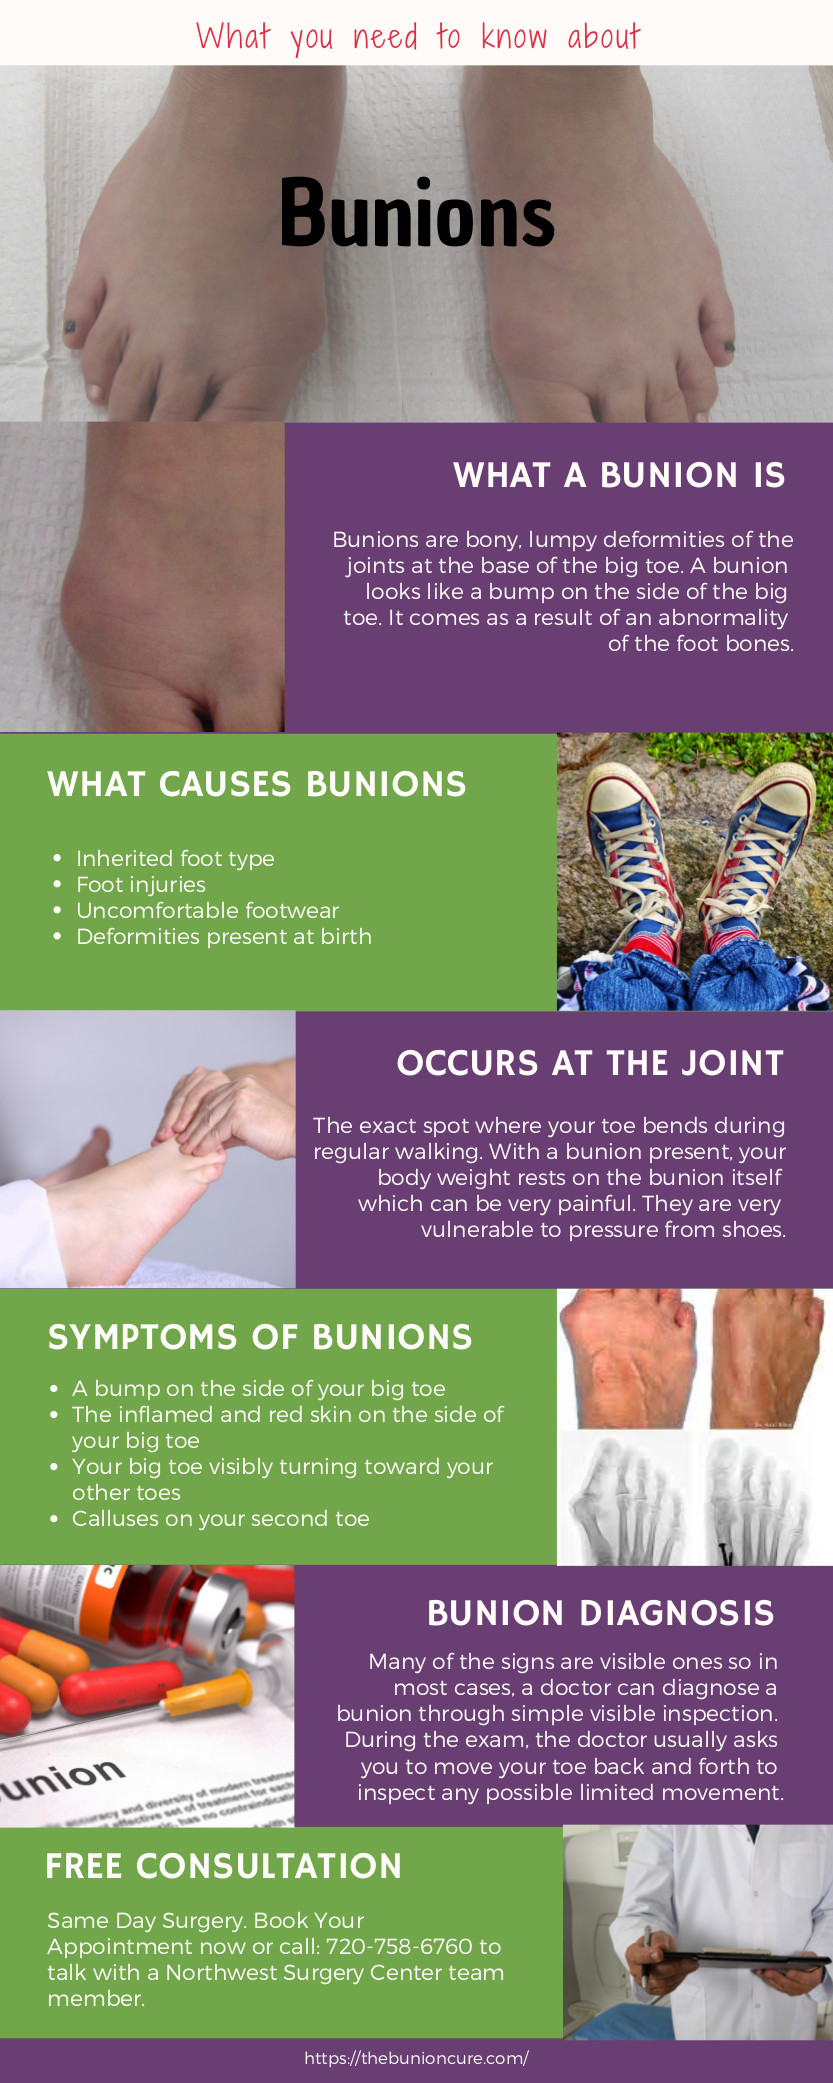 What You Need To Know About Bunions Infographic